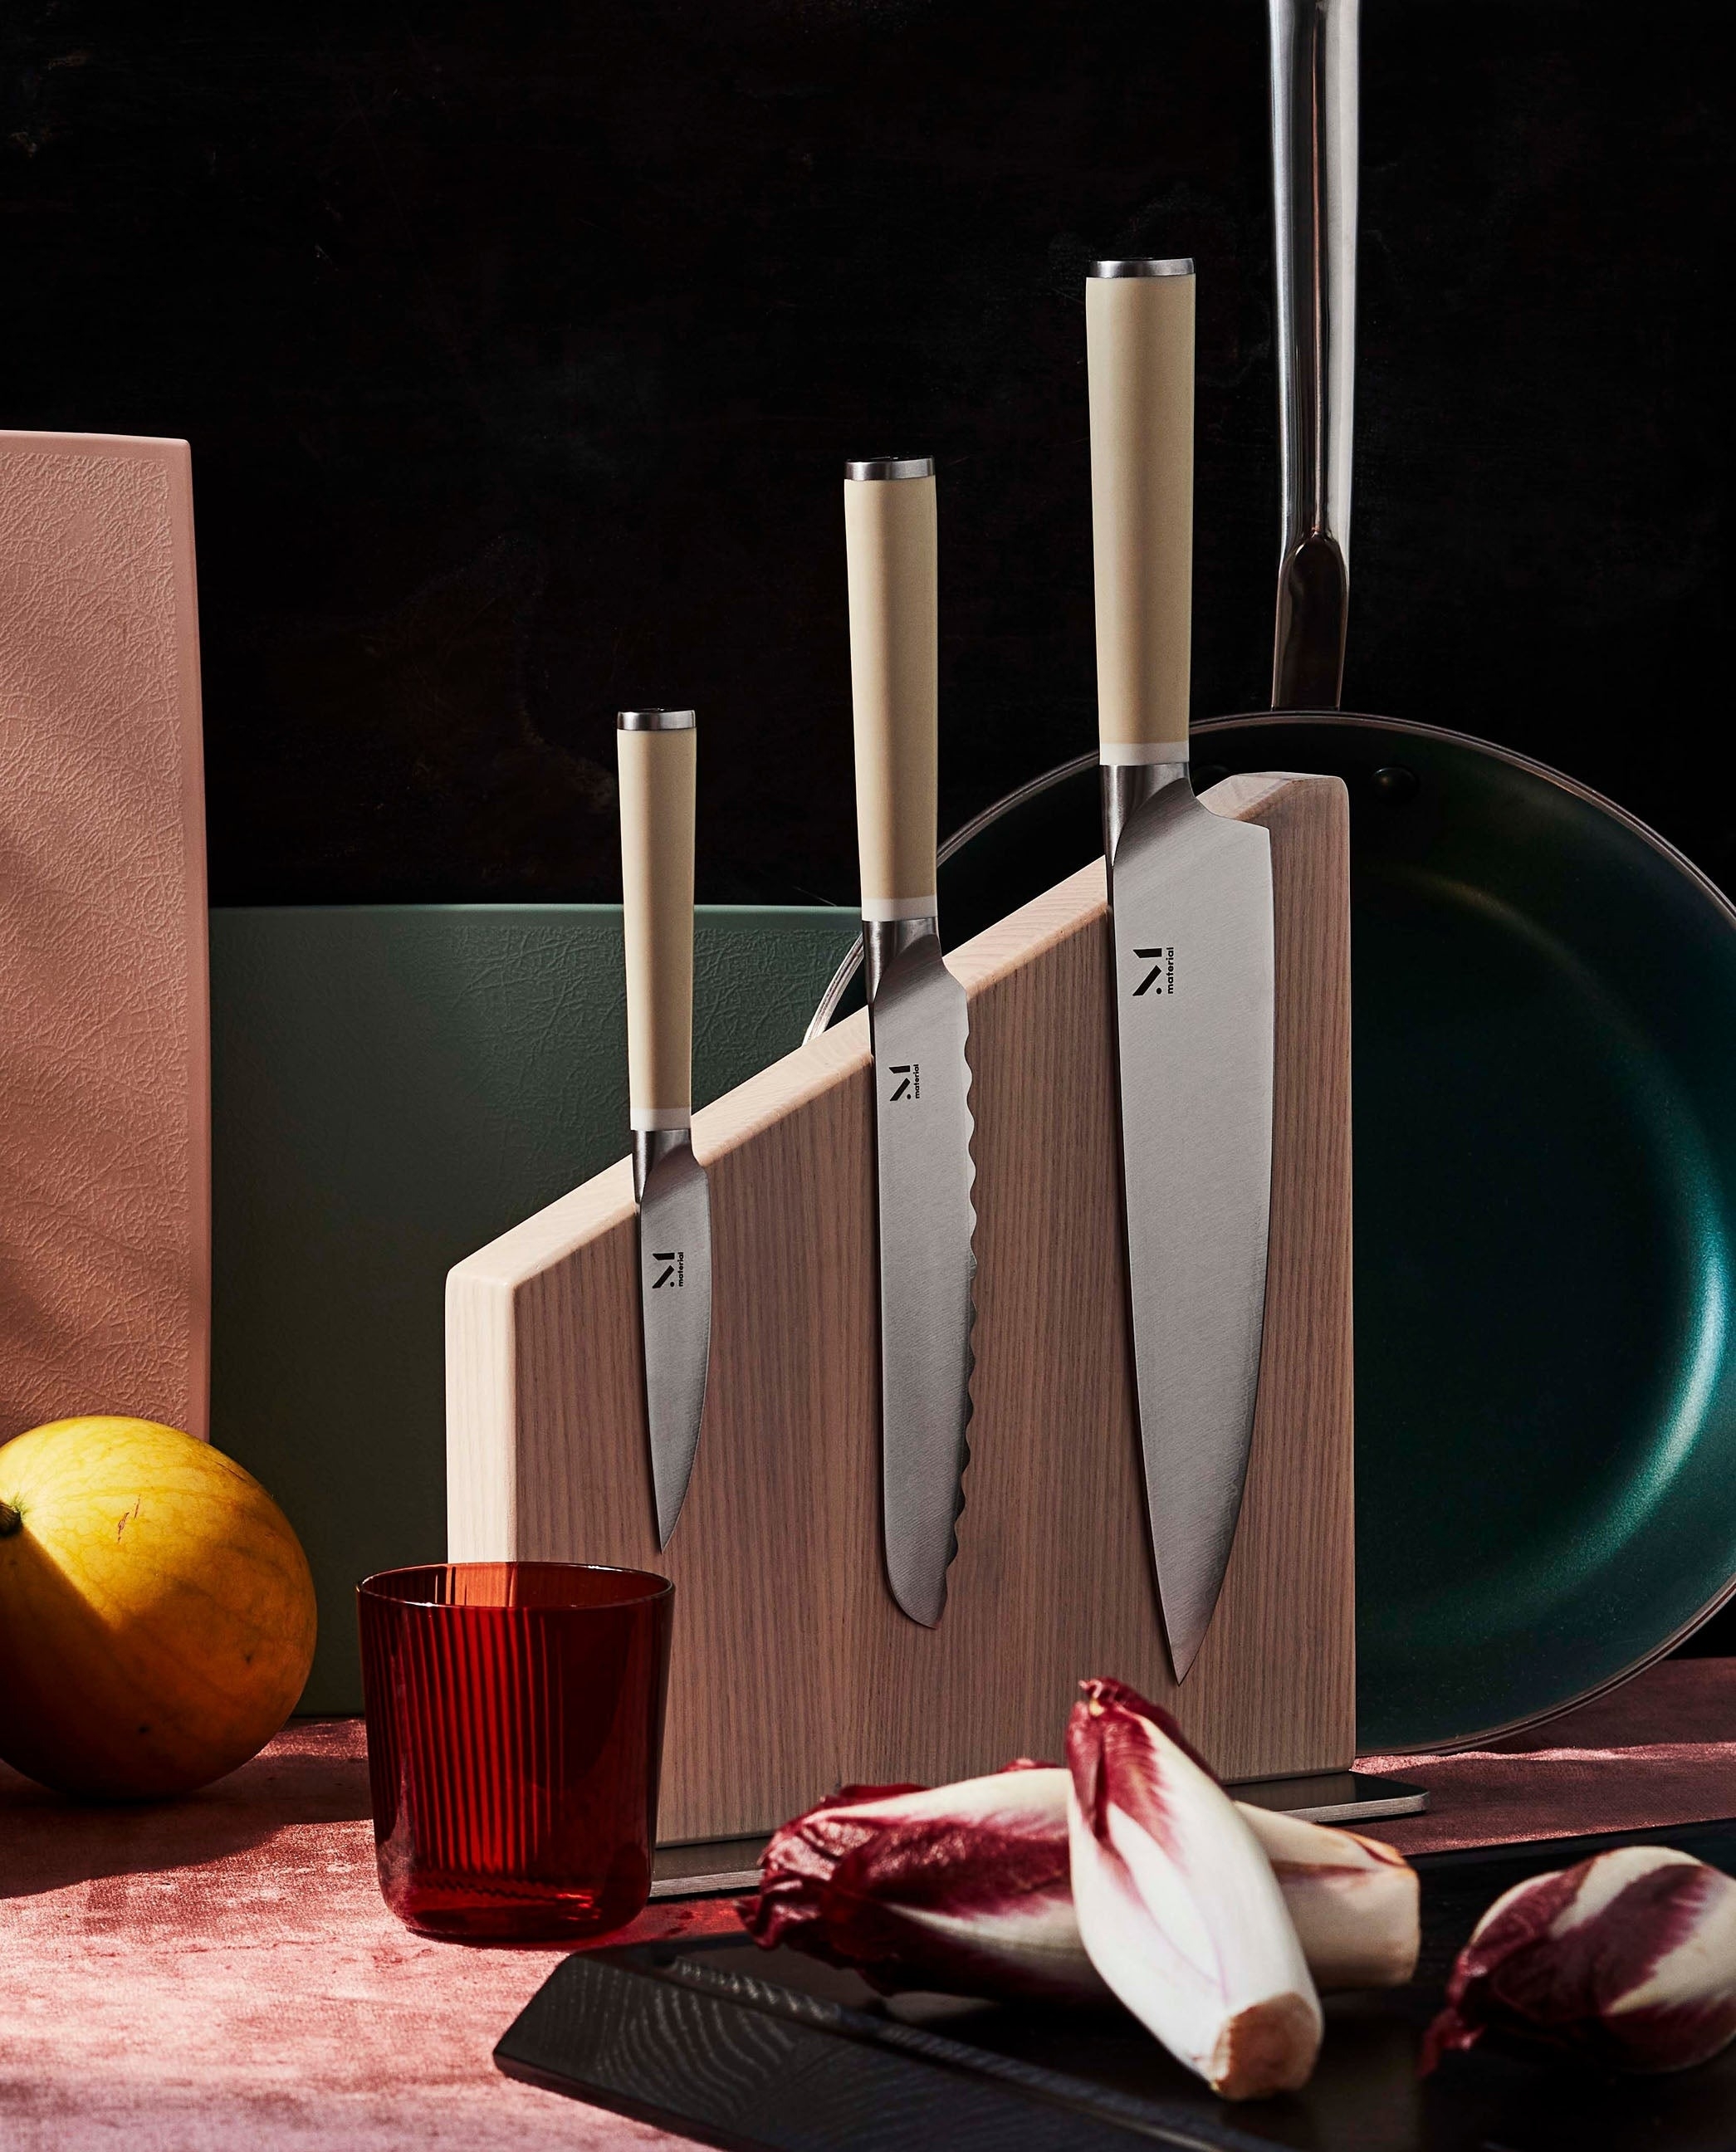 the wooden stand with three kitchen knives